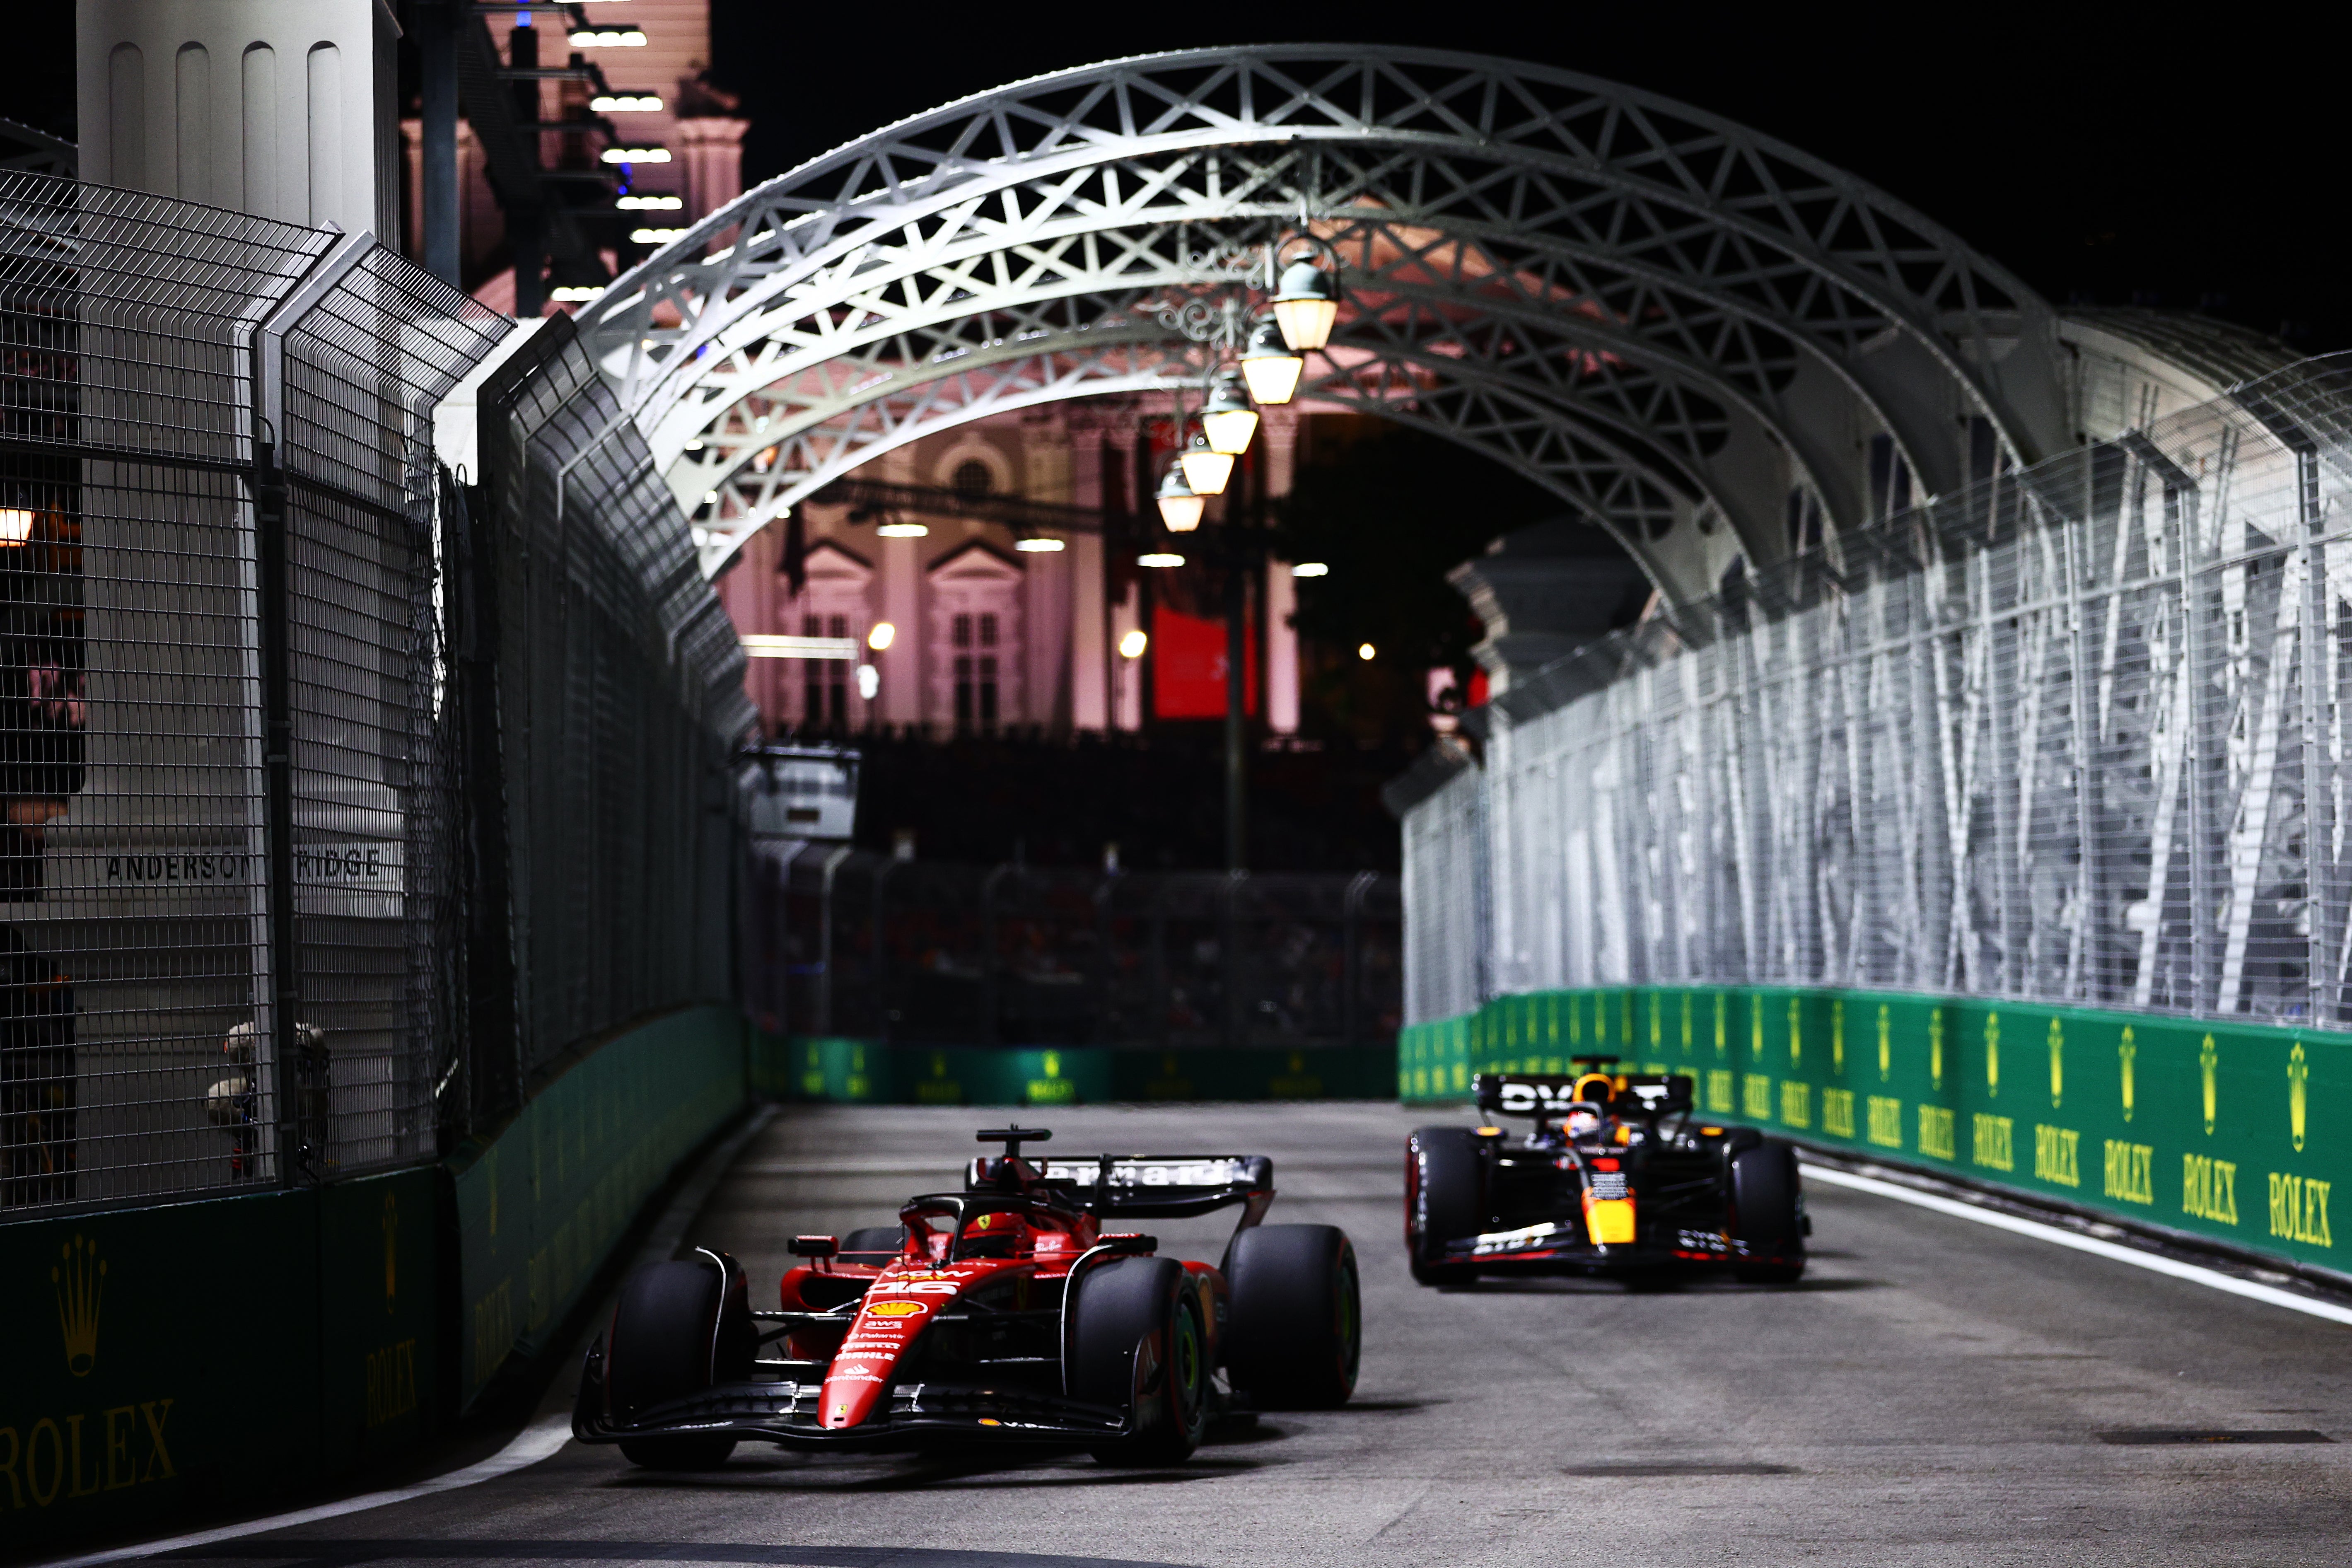 Ferrari were quicker than Red Bull in Friday practice in Singapore